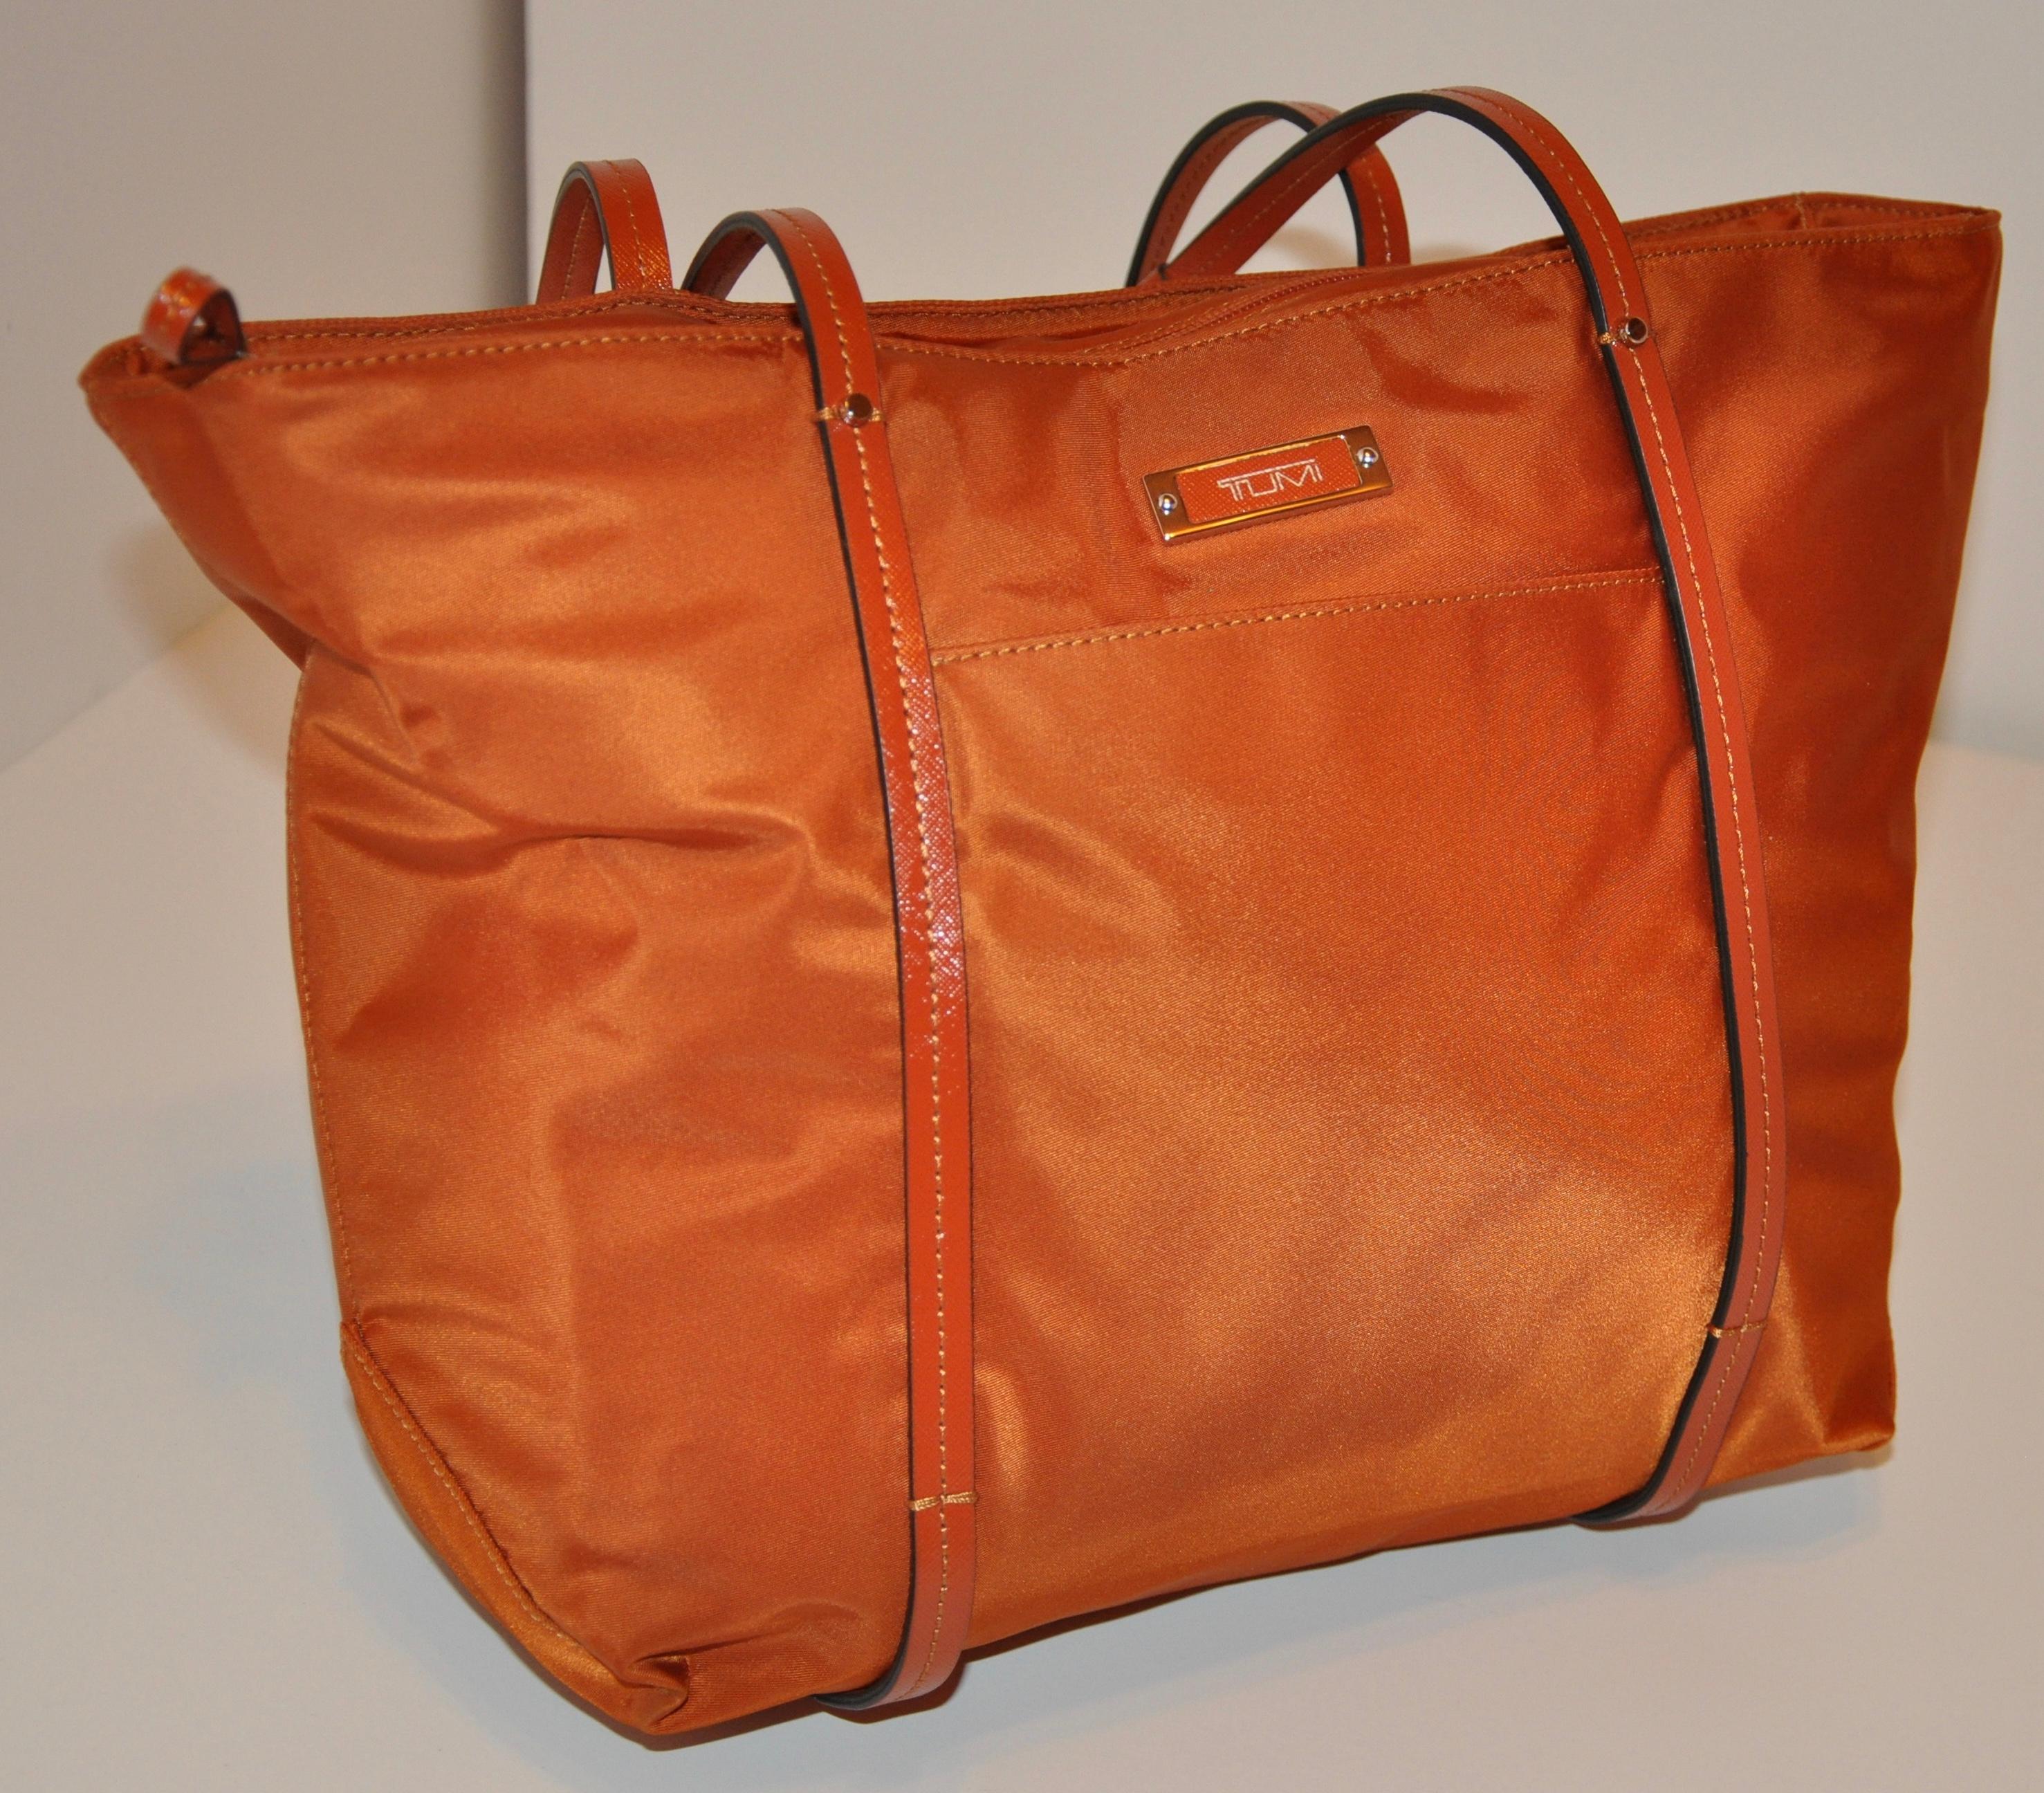        Tumi wonderfully detailed golden bronze-Tangerine nylon zippered top double-handle tote bag has a large zipper compartment as well as two open compartments within the interior for all your organizational needs when needed. The zippered top